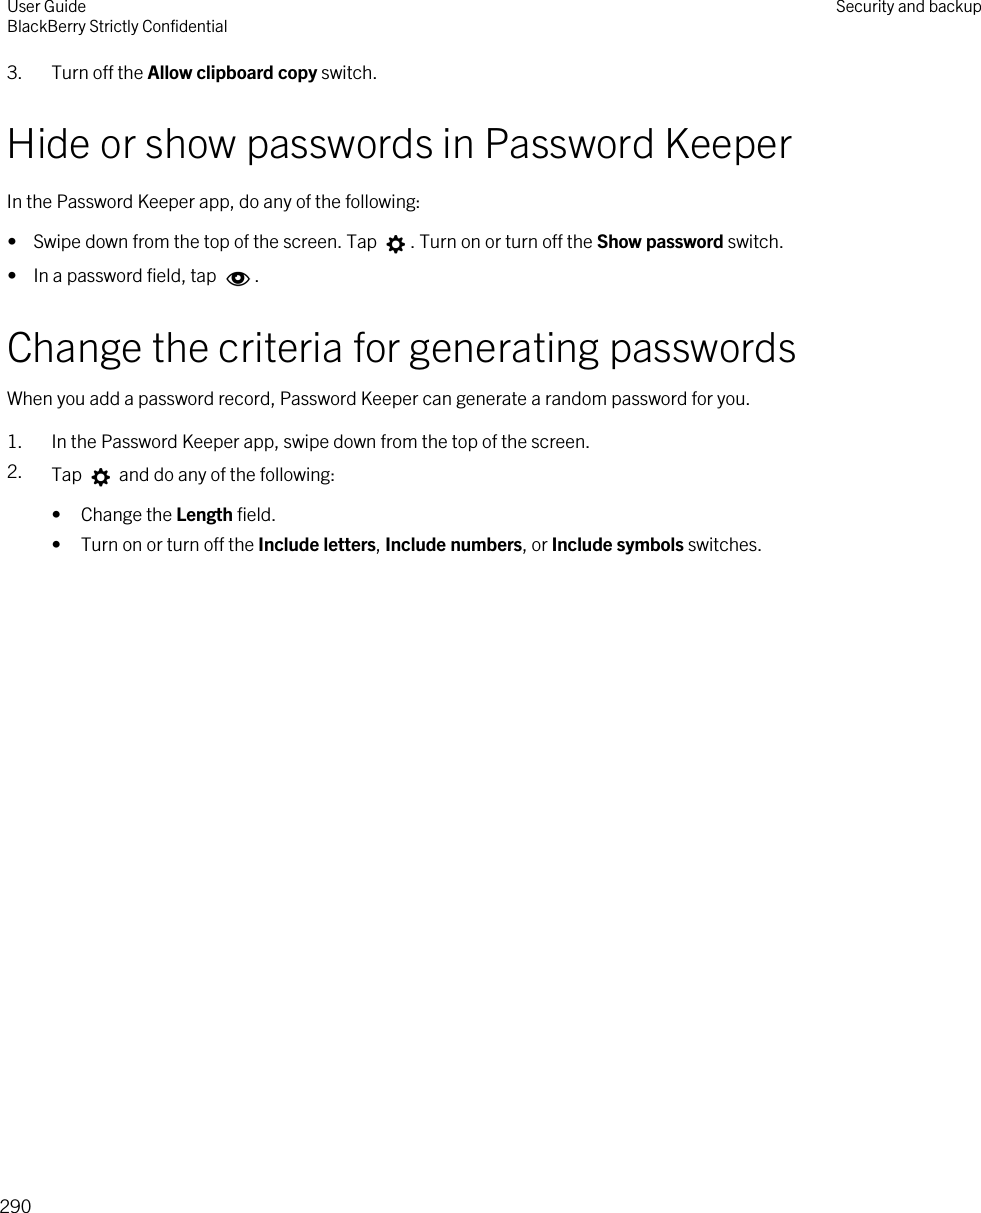 3. Turn off the Allow clipboard copy switch.Hide or show passwords in Password KeeperIn the Password Keeper app, do any of the following:•  Swipe down from the top of the screen. Tap  . Turn on or turn off the Show password switch.•  In a password field, tap  .Change the criteria for generating passwordsWhen you add a password record, Password Keeper can generate a random password for you.1. In the Password Keeper app, swipe down from the top of the screen.2. Tap   and do any of the following:• Change the Length field.• Turn on or turn off the Include letters, Include numbers, or Include symbols switches.User GuideBlackBerry Strictly Confidential Security and backup290